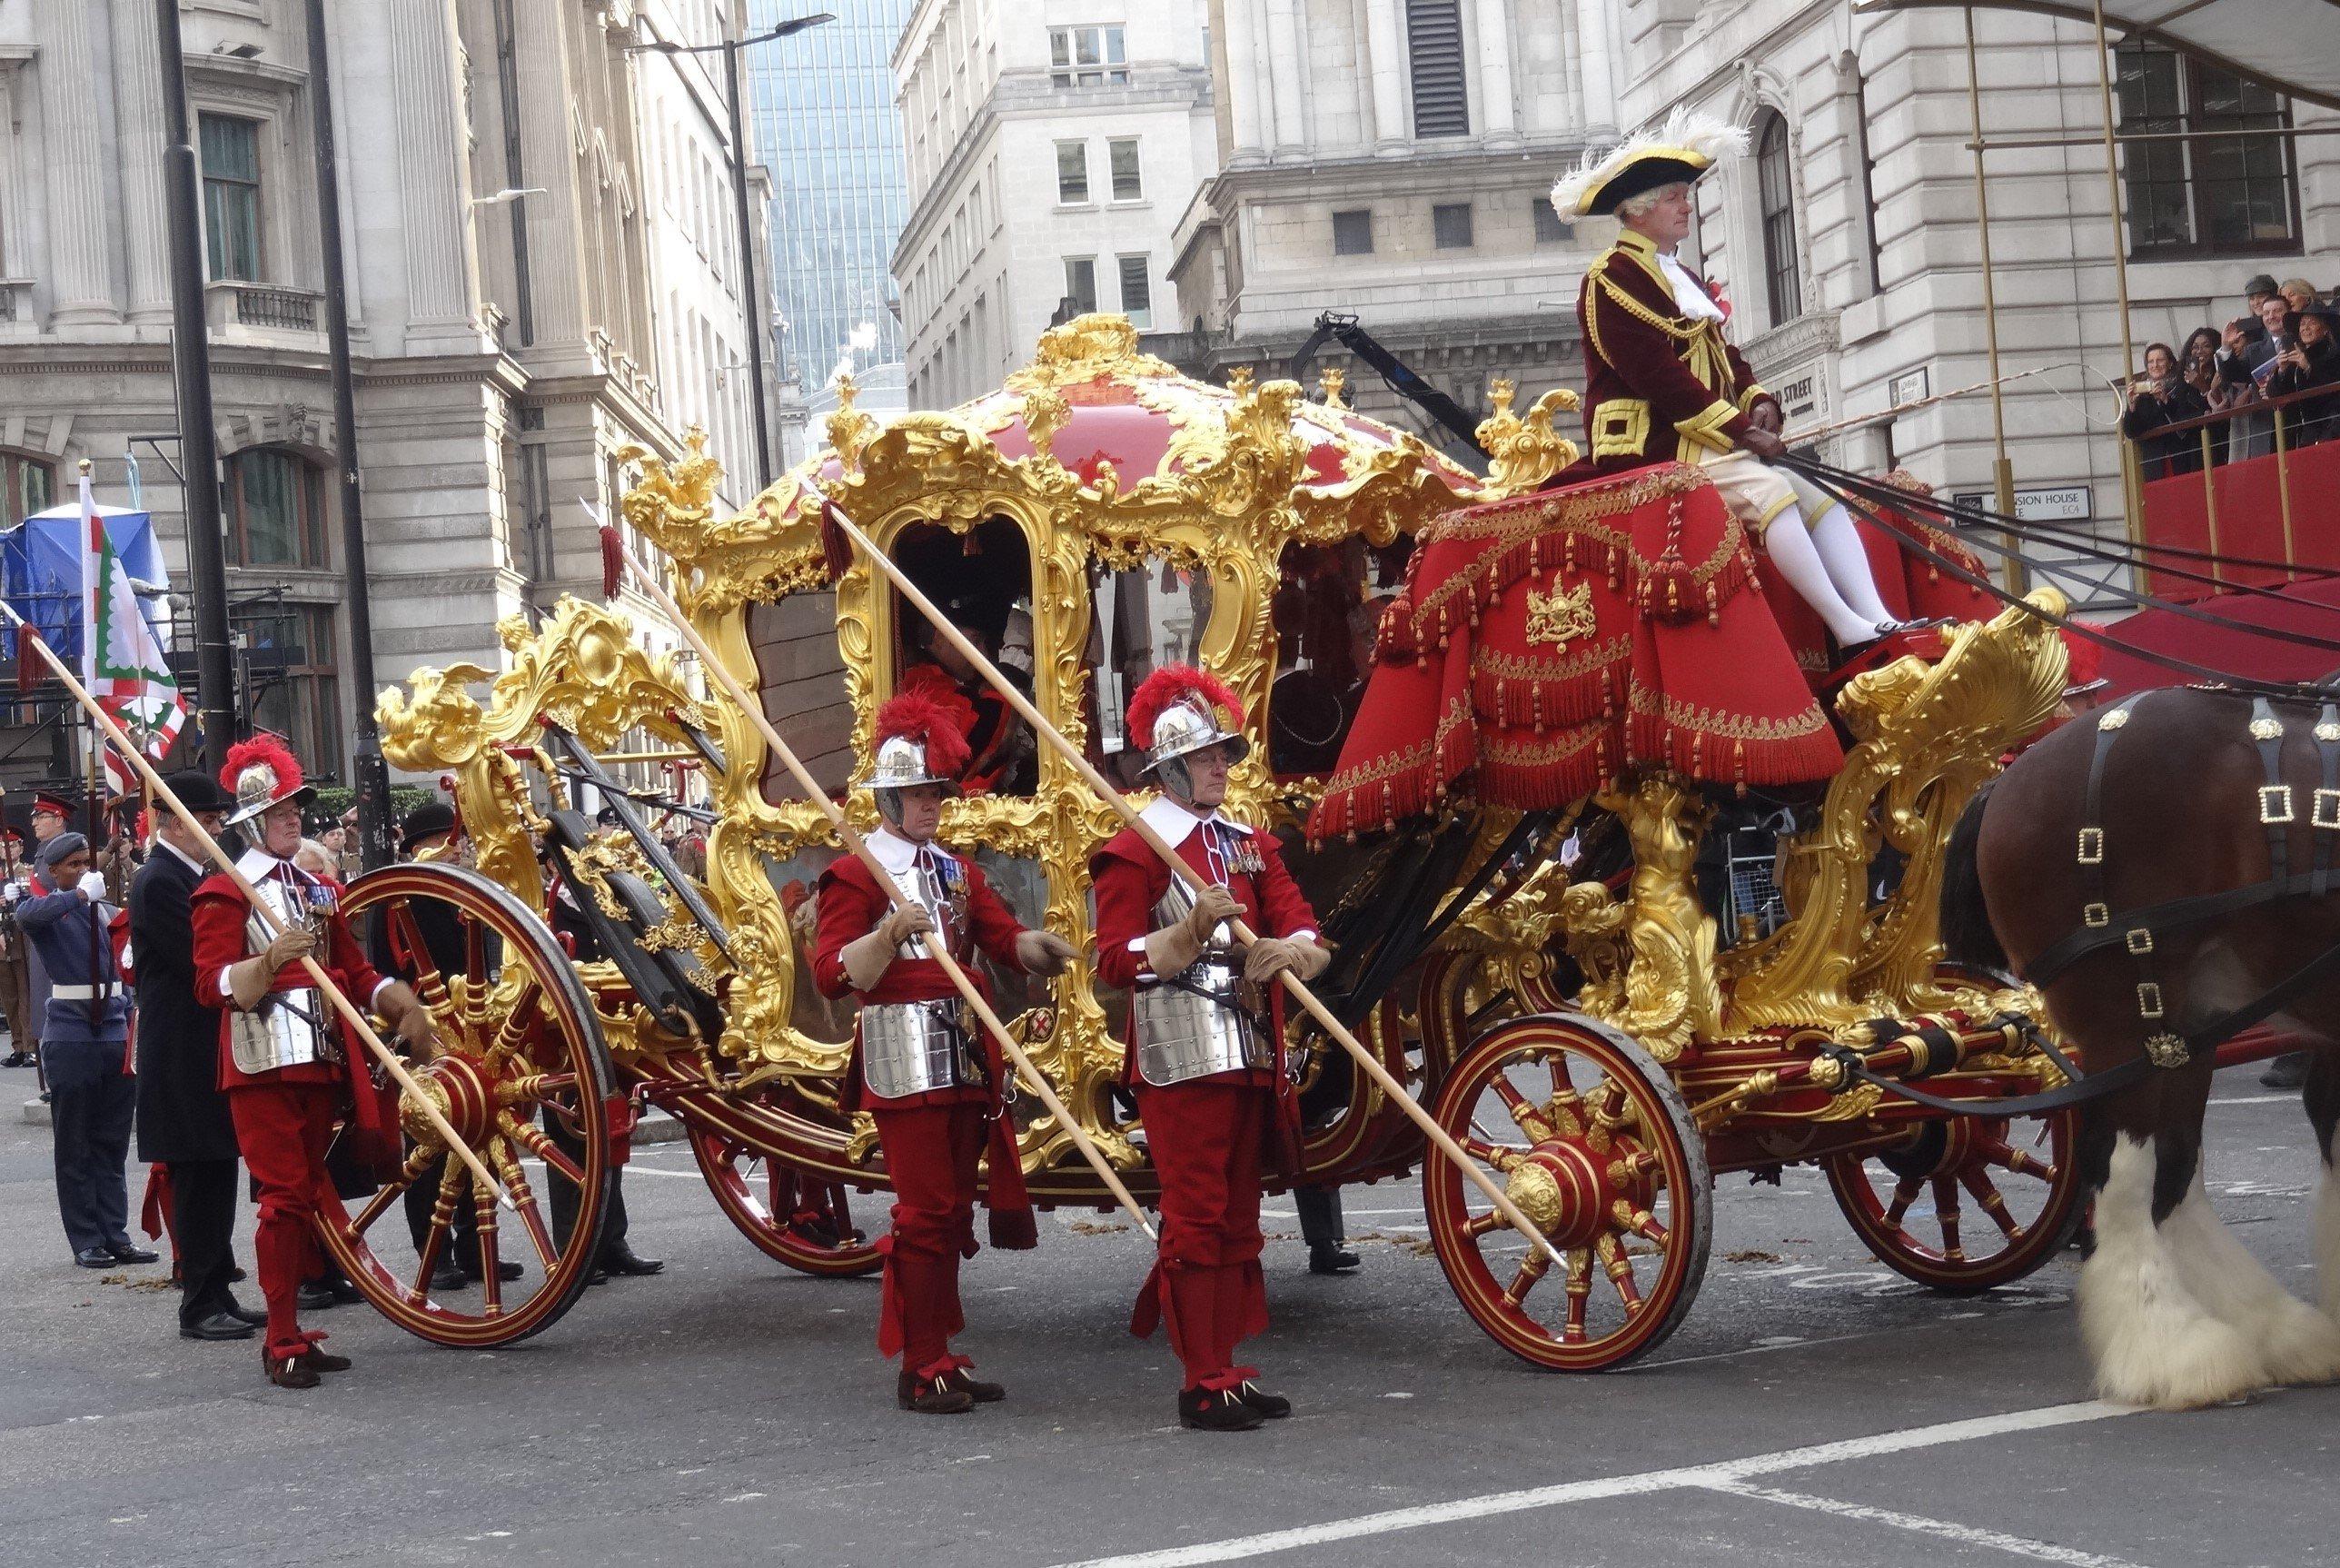 On Saturday 9th November 46 members of Girlguiding Sussex Central county took part in this year's Lord Mayor's Show in London. SUS-191118-125703001